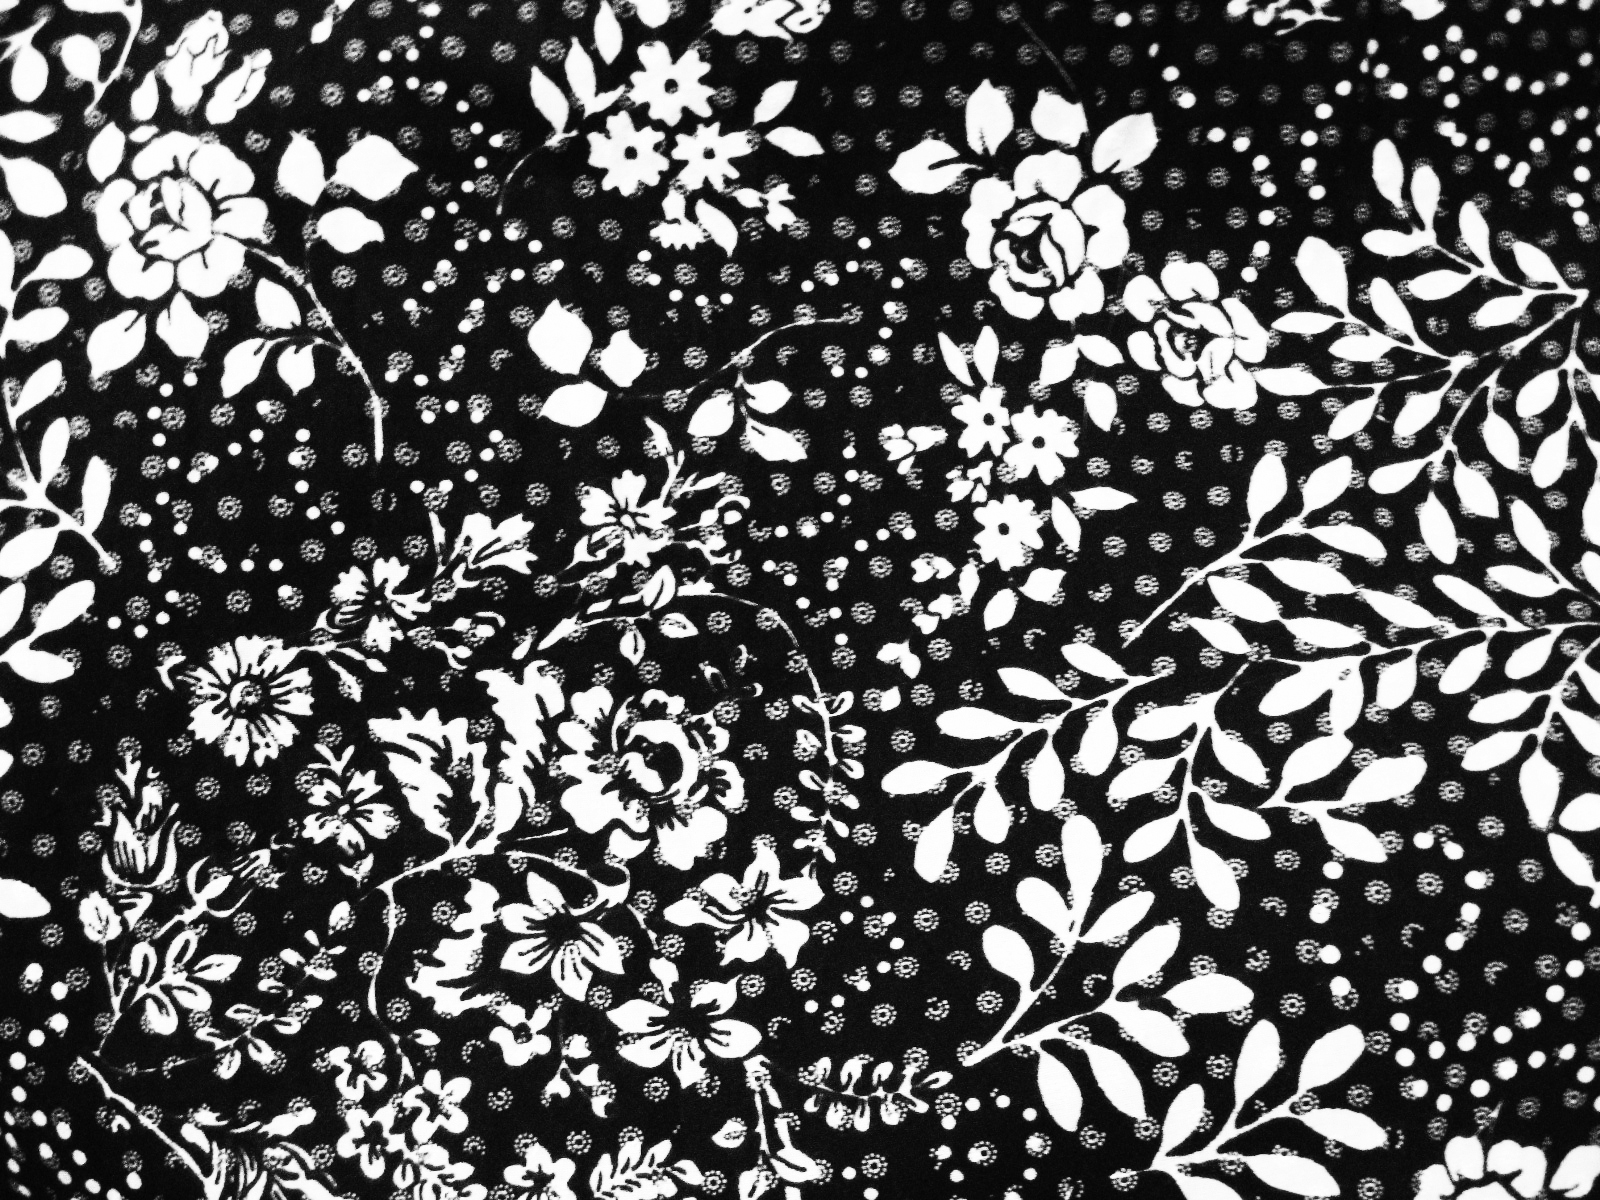 Black and White Floral Design. Aprons from Zazzle.com